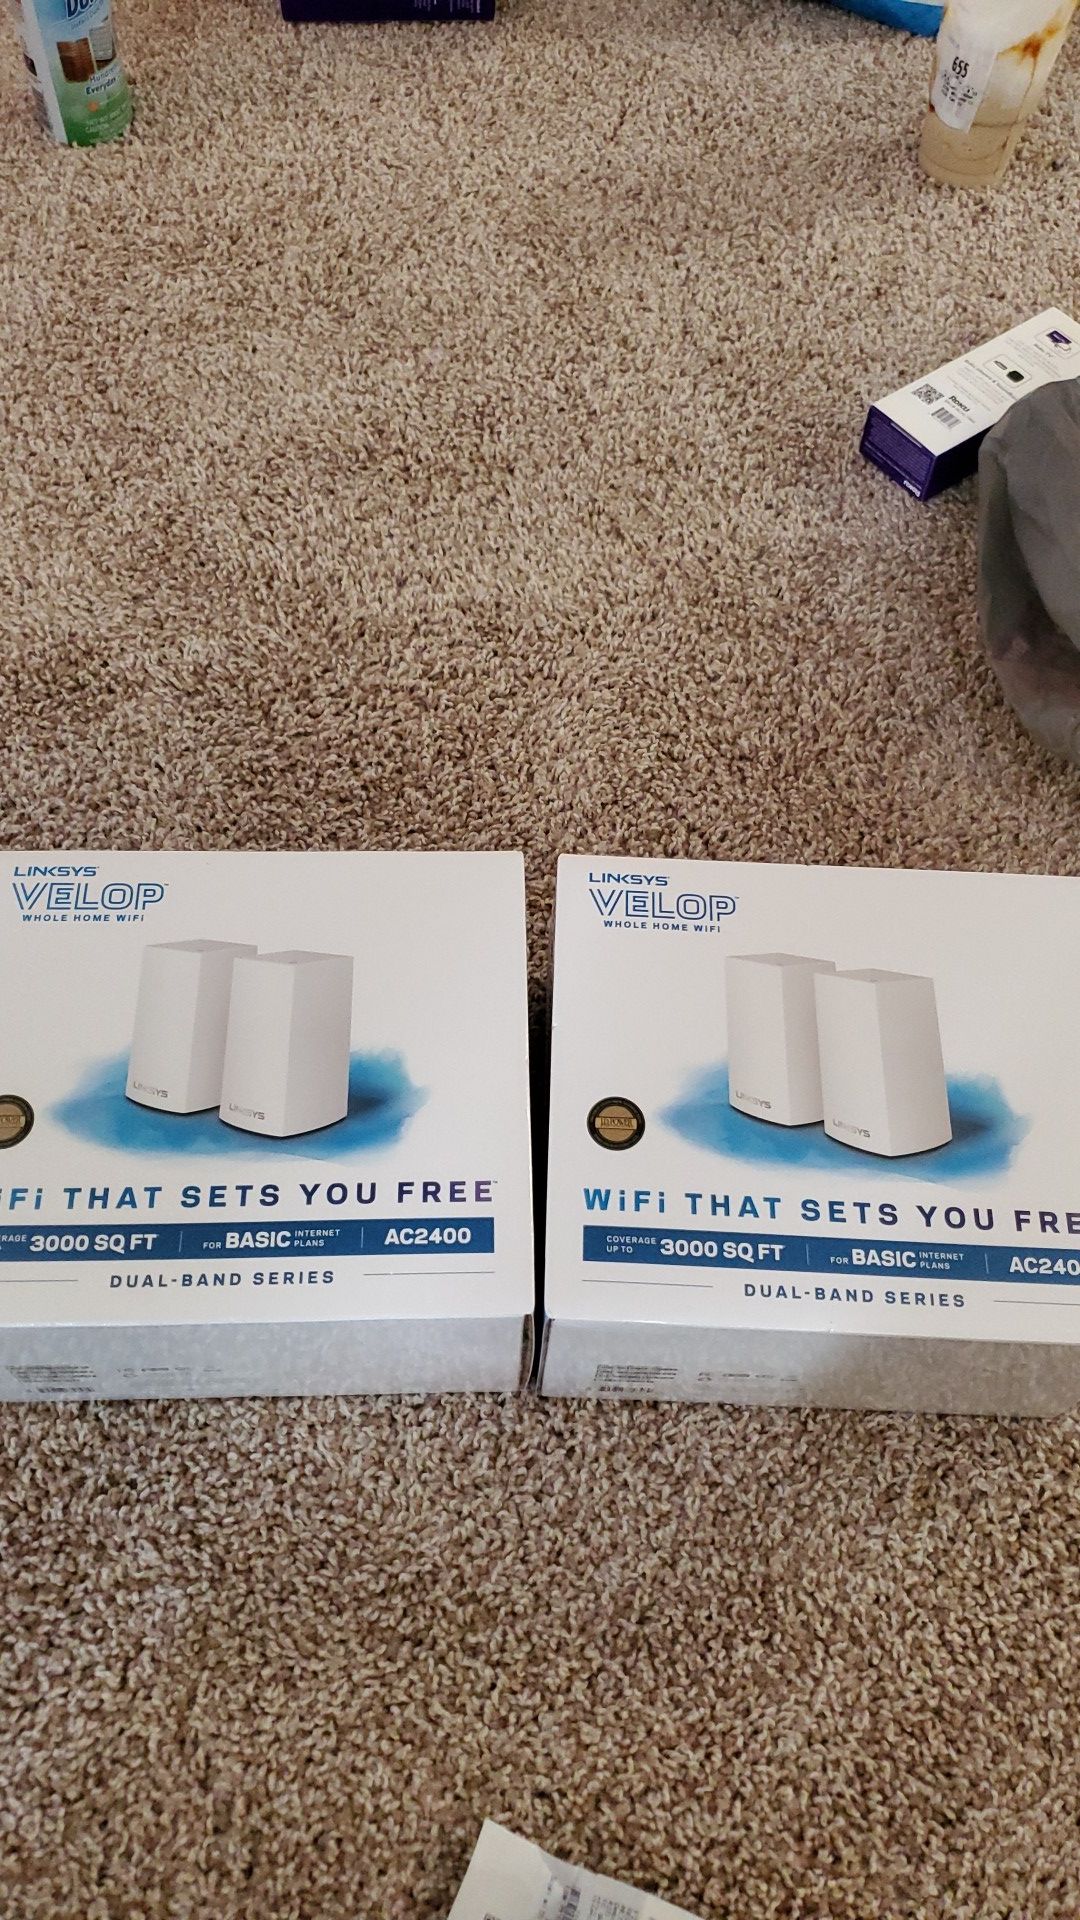 Linksys Velop Home Mesh WiFi System – WiFi Router/WiFi Extender for Whole-Home Mesh Network (2-pack, White)